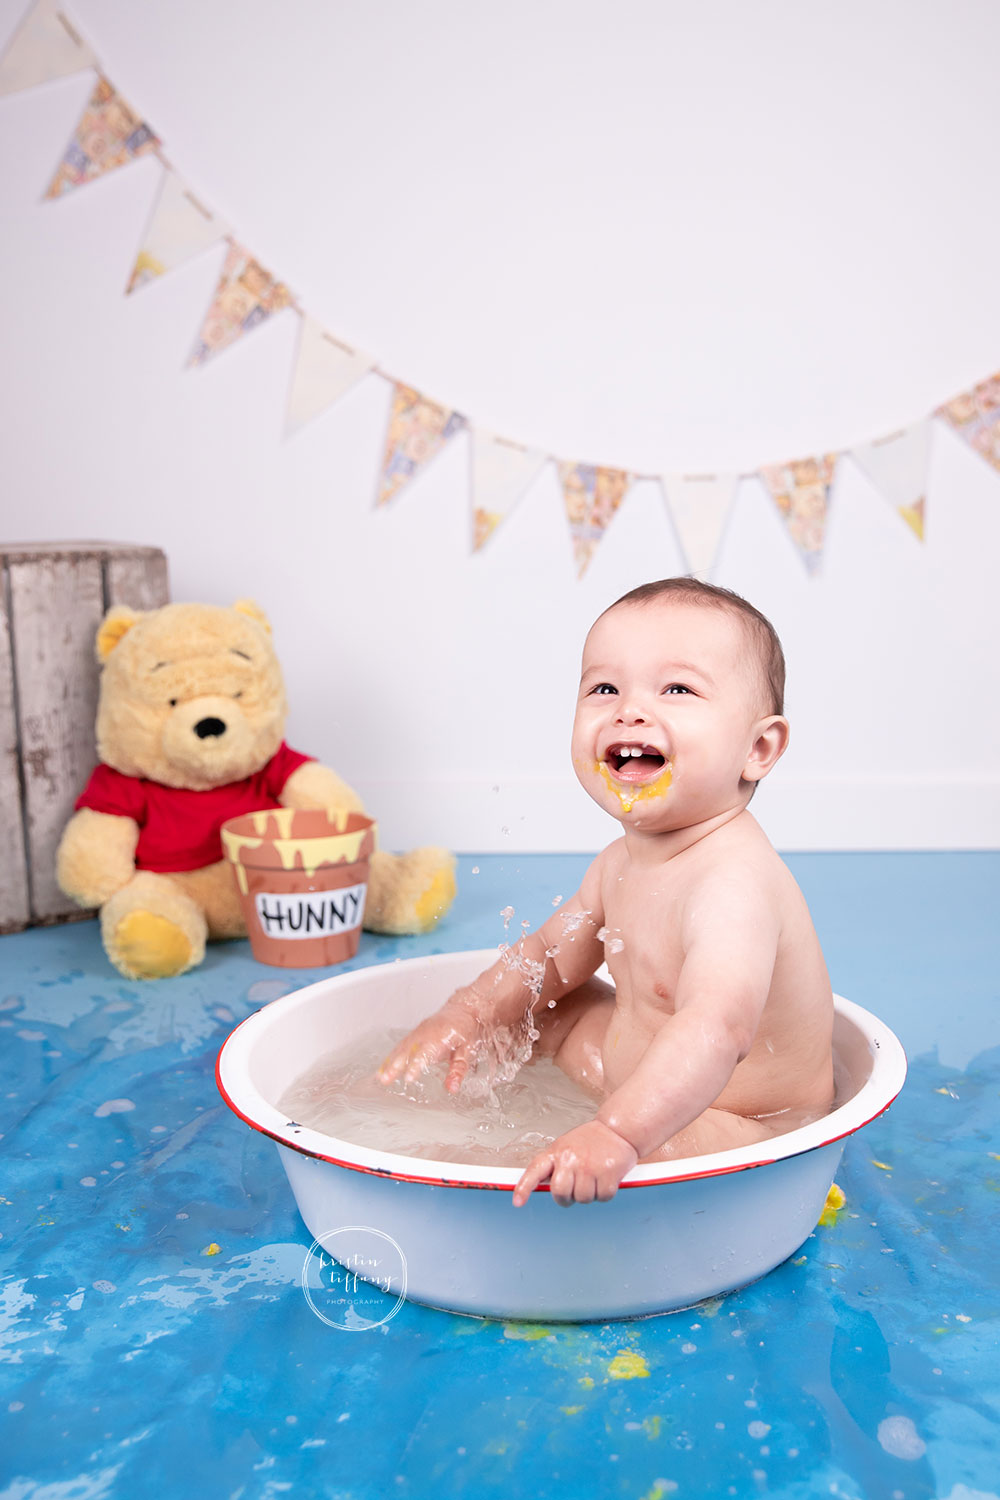 a photo of a baby boy at a cake smash photo session